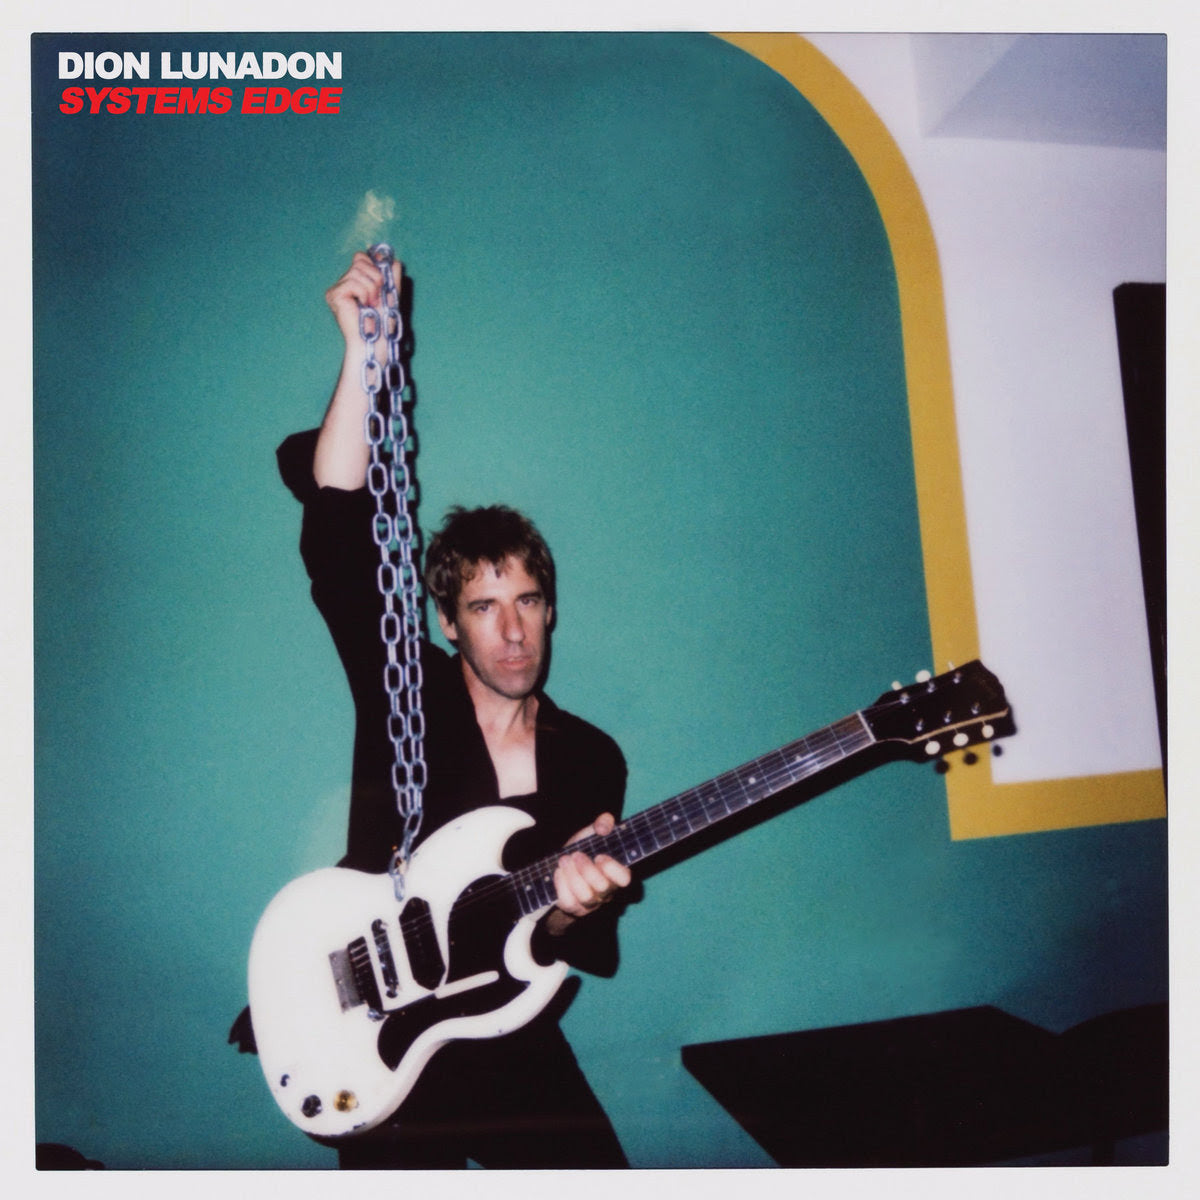 Dion Lunadon - Systems Edge | Buy the Vinyl LP from Flying Nun Records